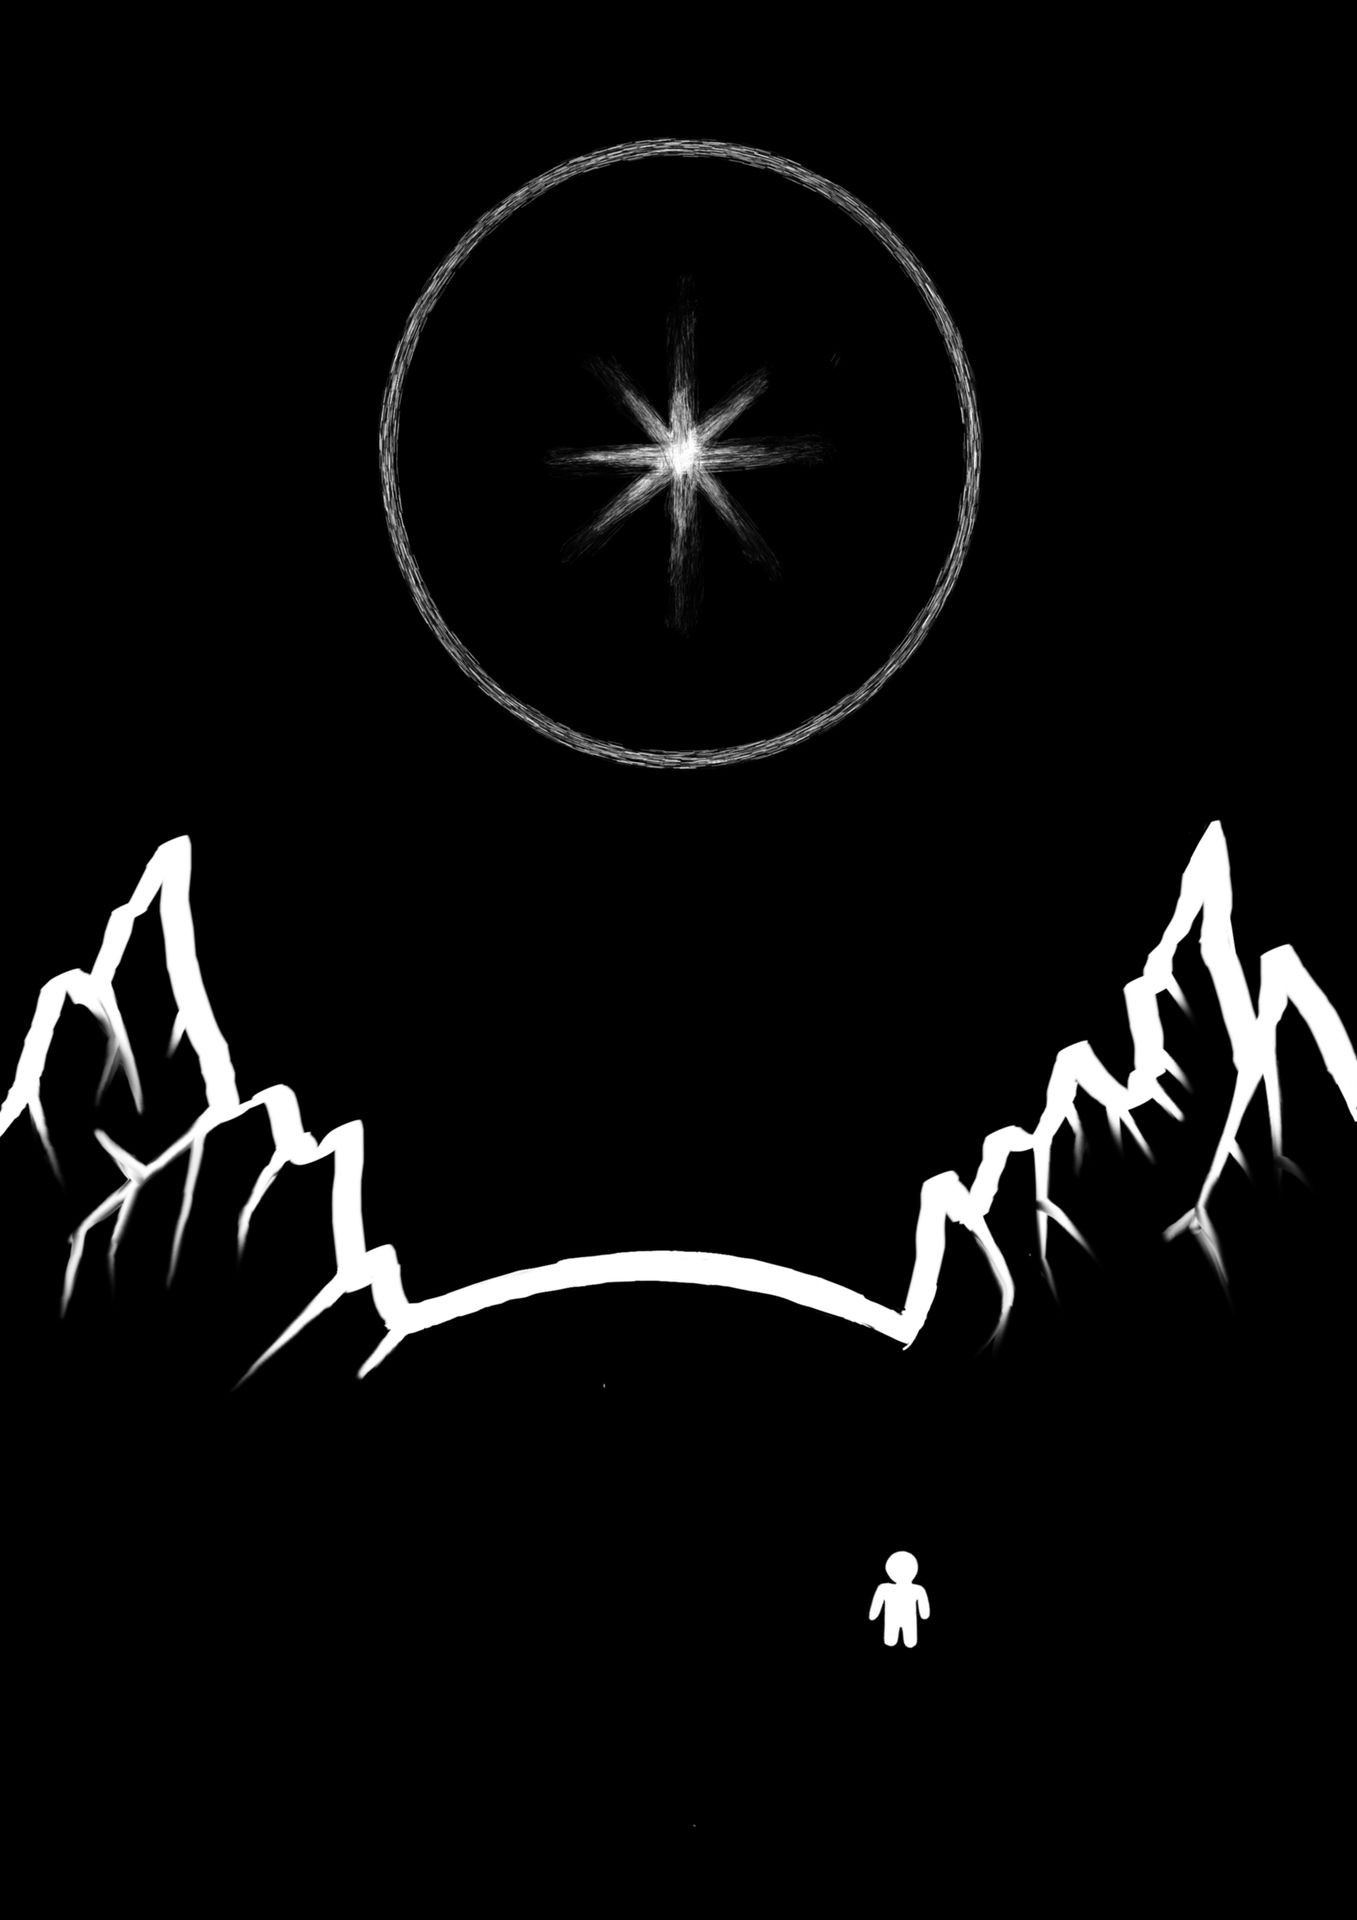 a black & white minimalistic artwork of a person looking at a bright star.